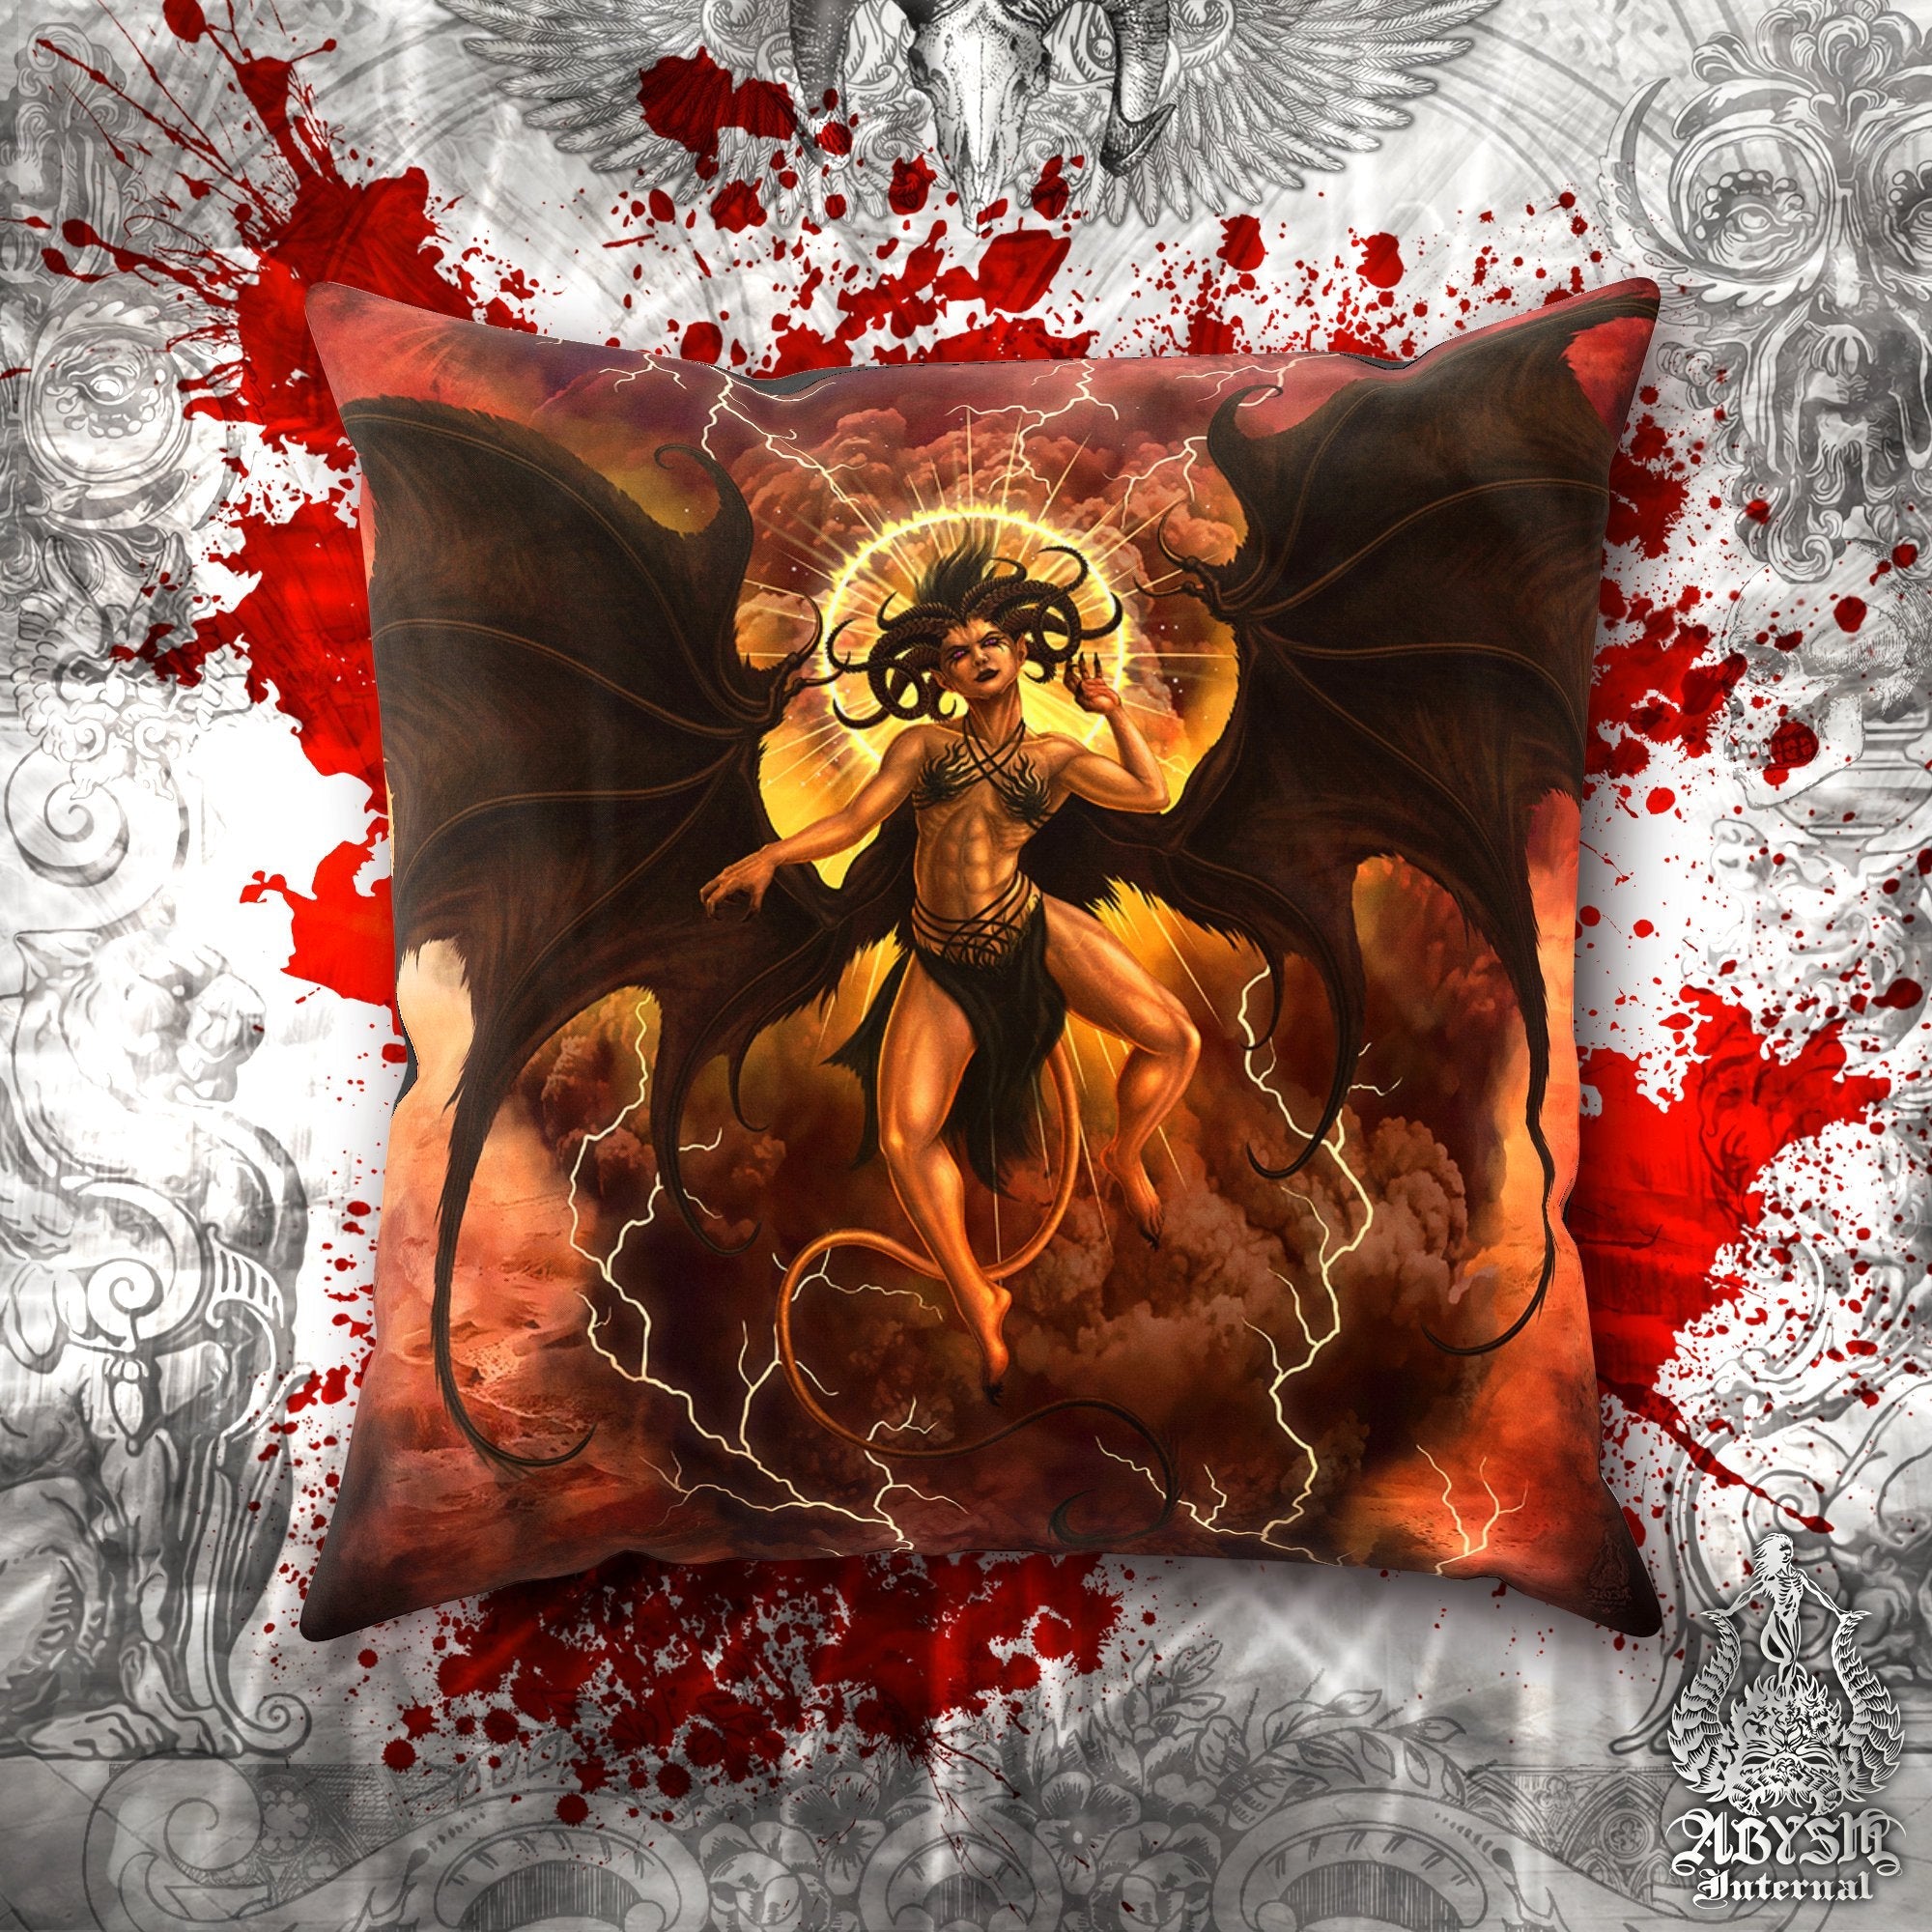 Lilith Throw Pillow, Decorative Accent Cushion, Demon, Game Room Decor, Dark Art, Alternative Home - Clothed - Abysm Internal